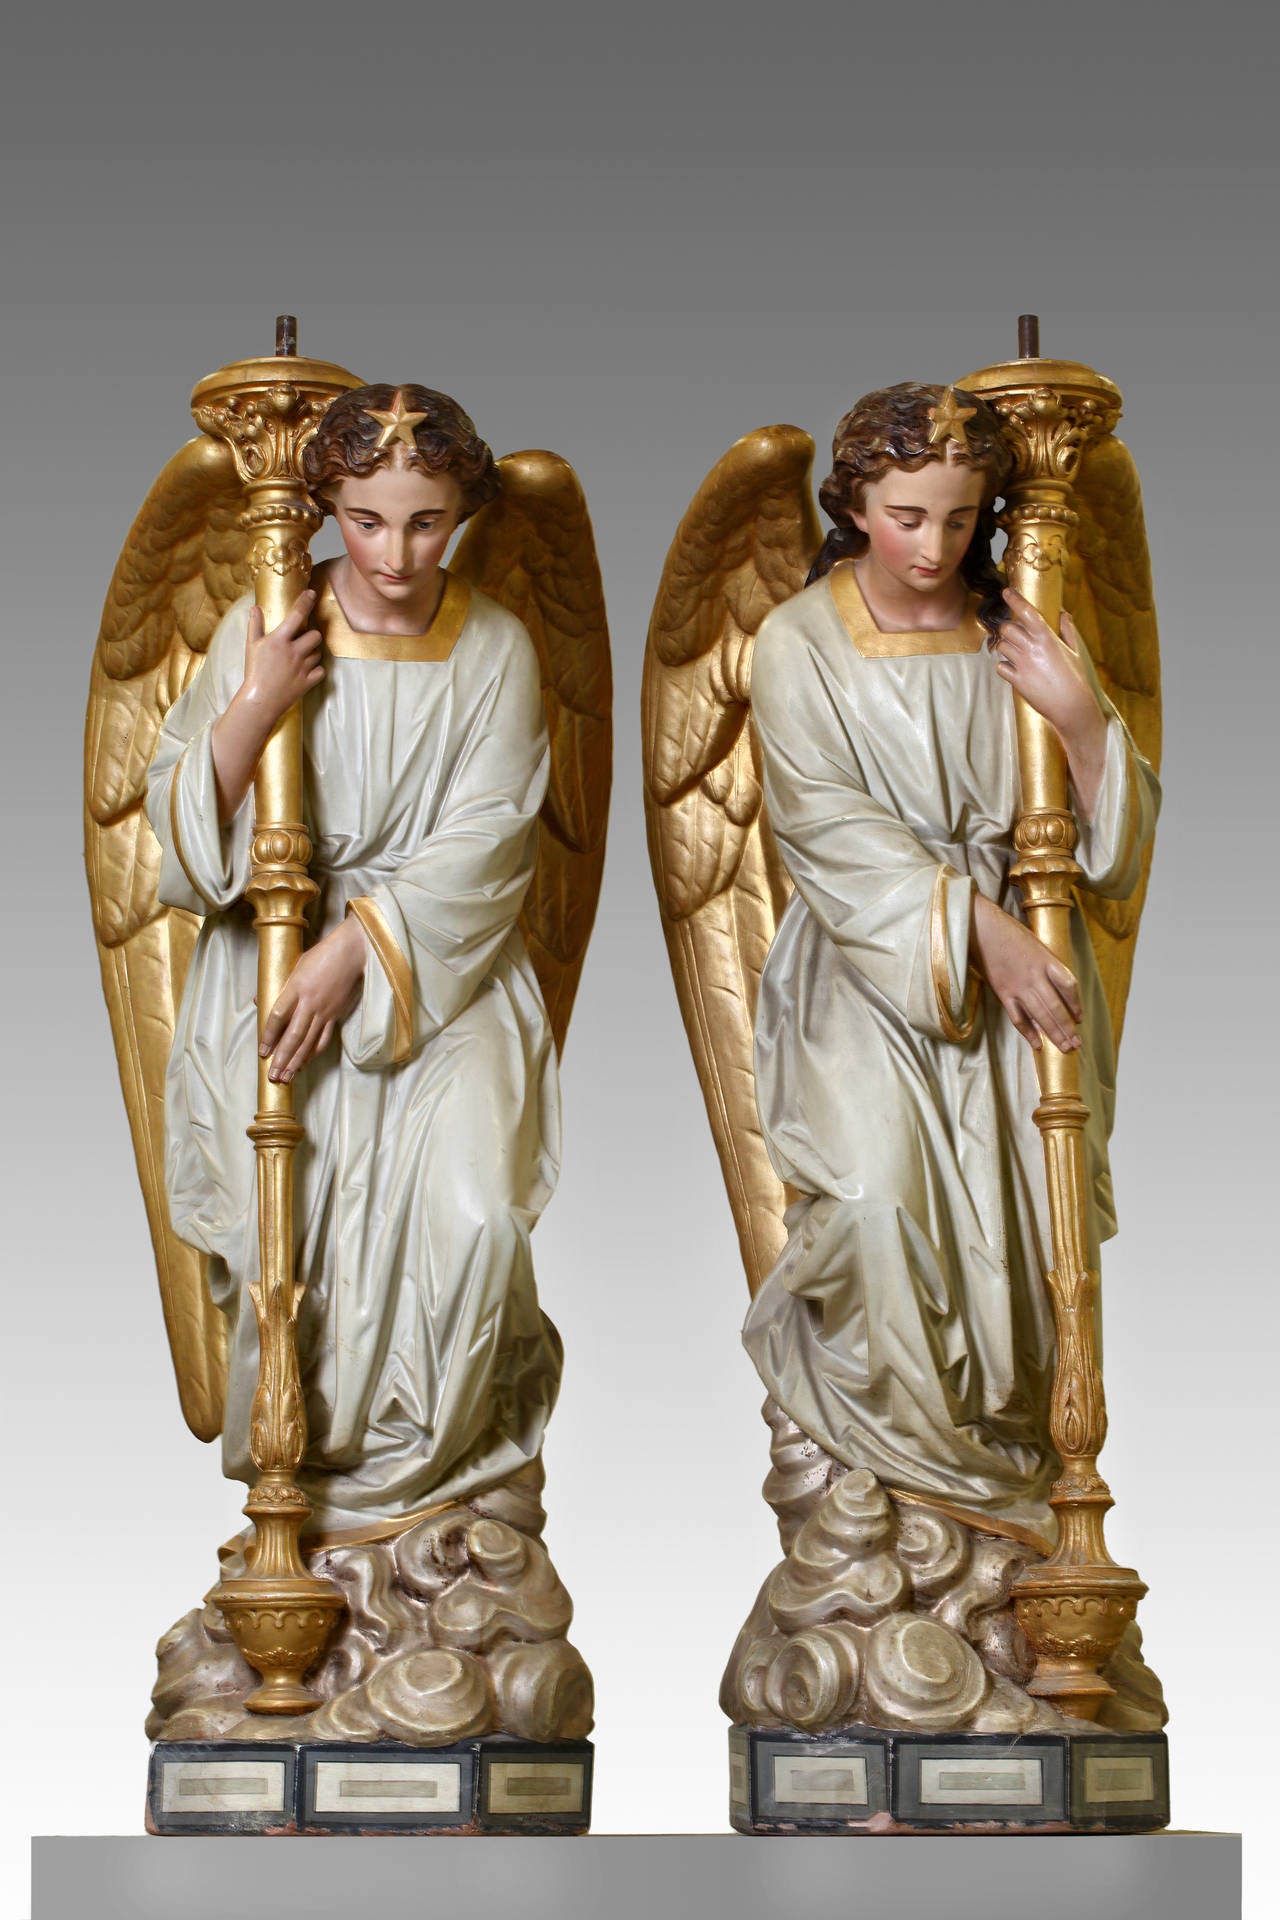 Third quarter 19th century, portrayed as standing and opposing, clasping a standard torchere in both hands to the left shoulder and right shoulder respectively. Measures: 145 cm, high.